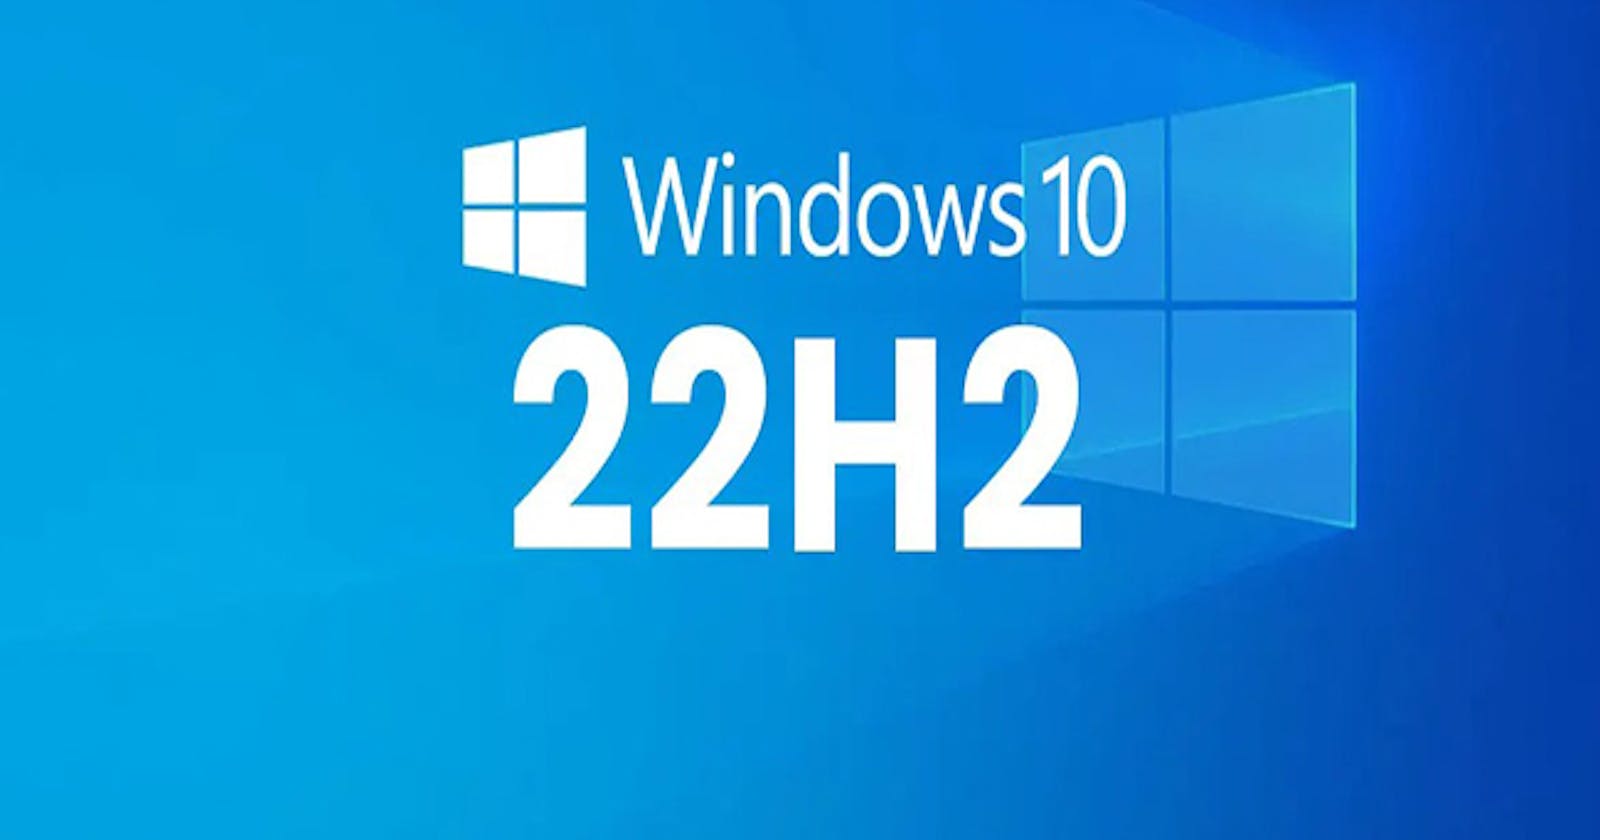 Download Windows 10 ISO 22H2 Latest Version